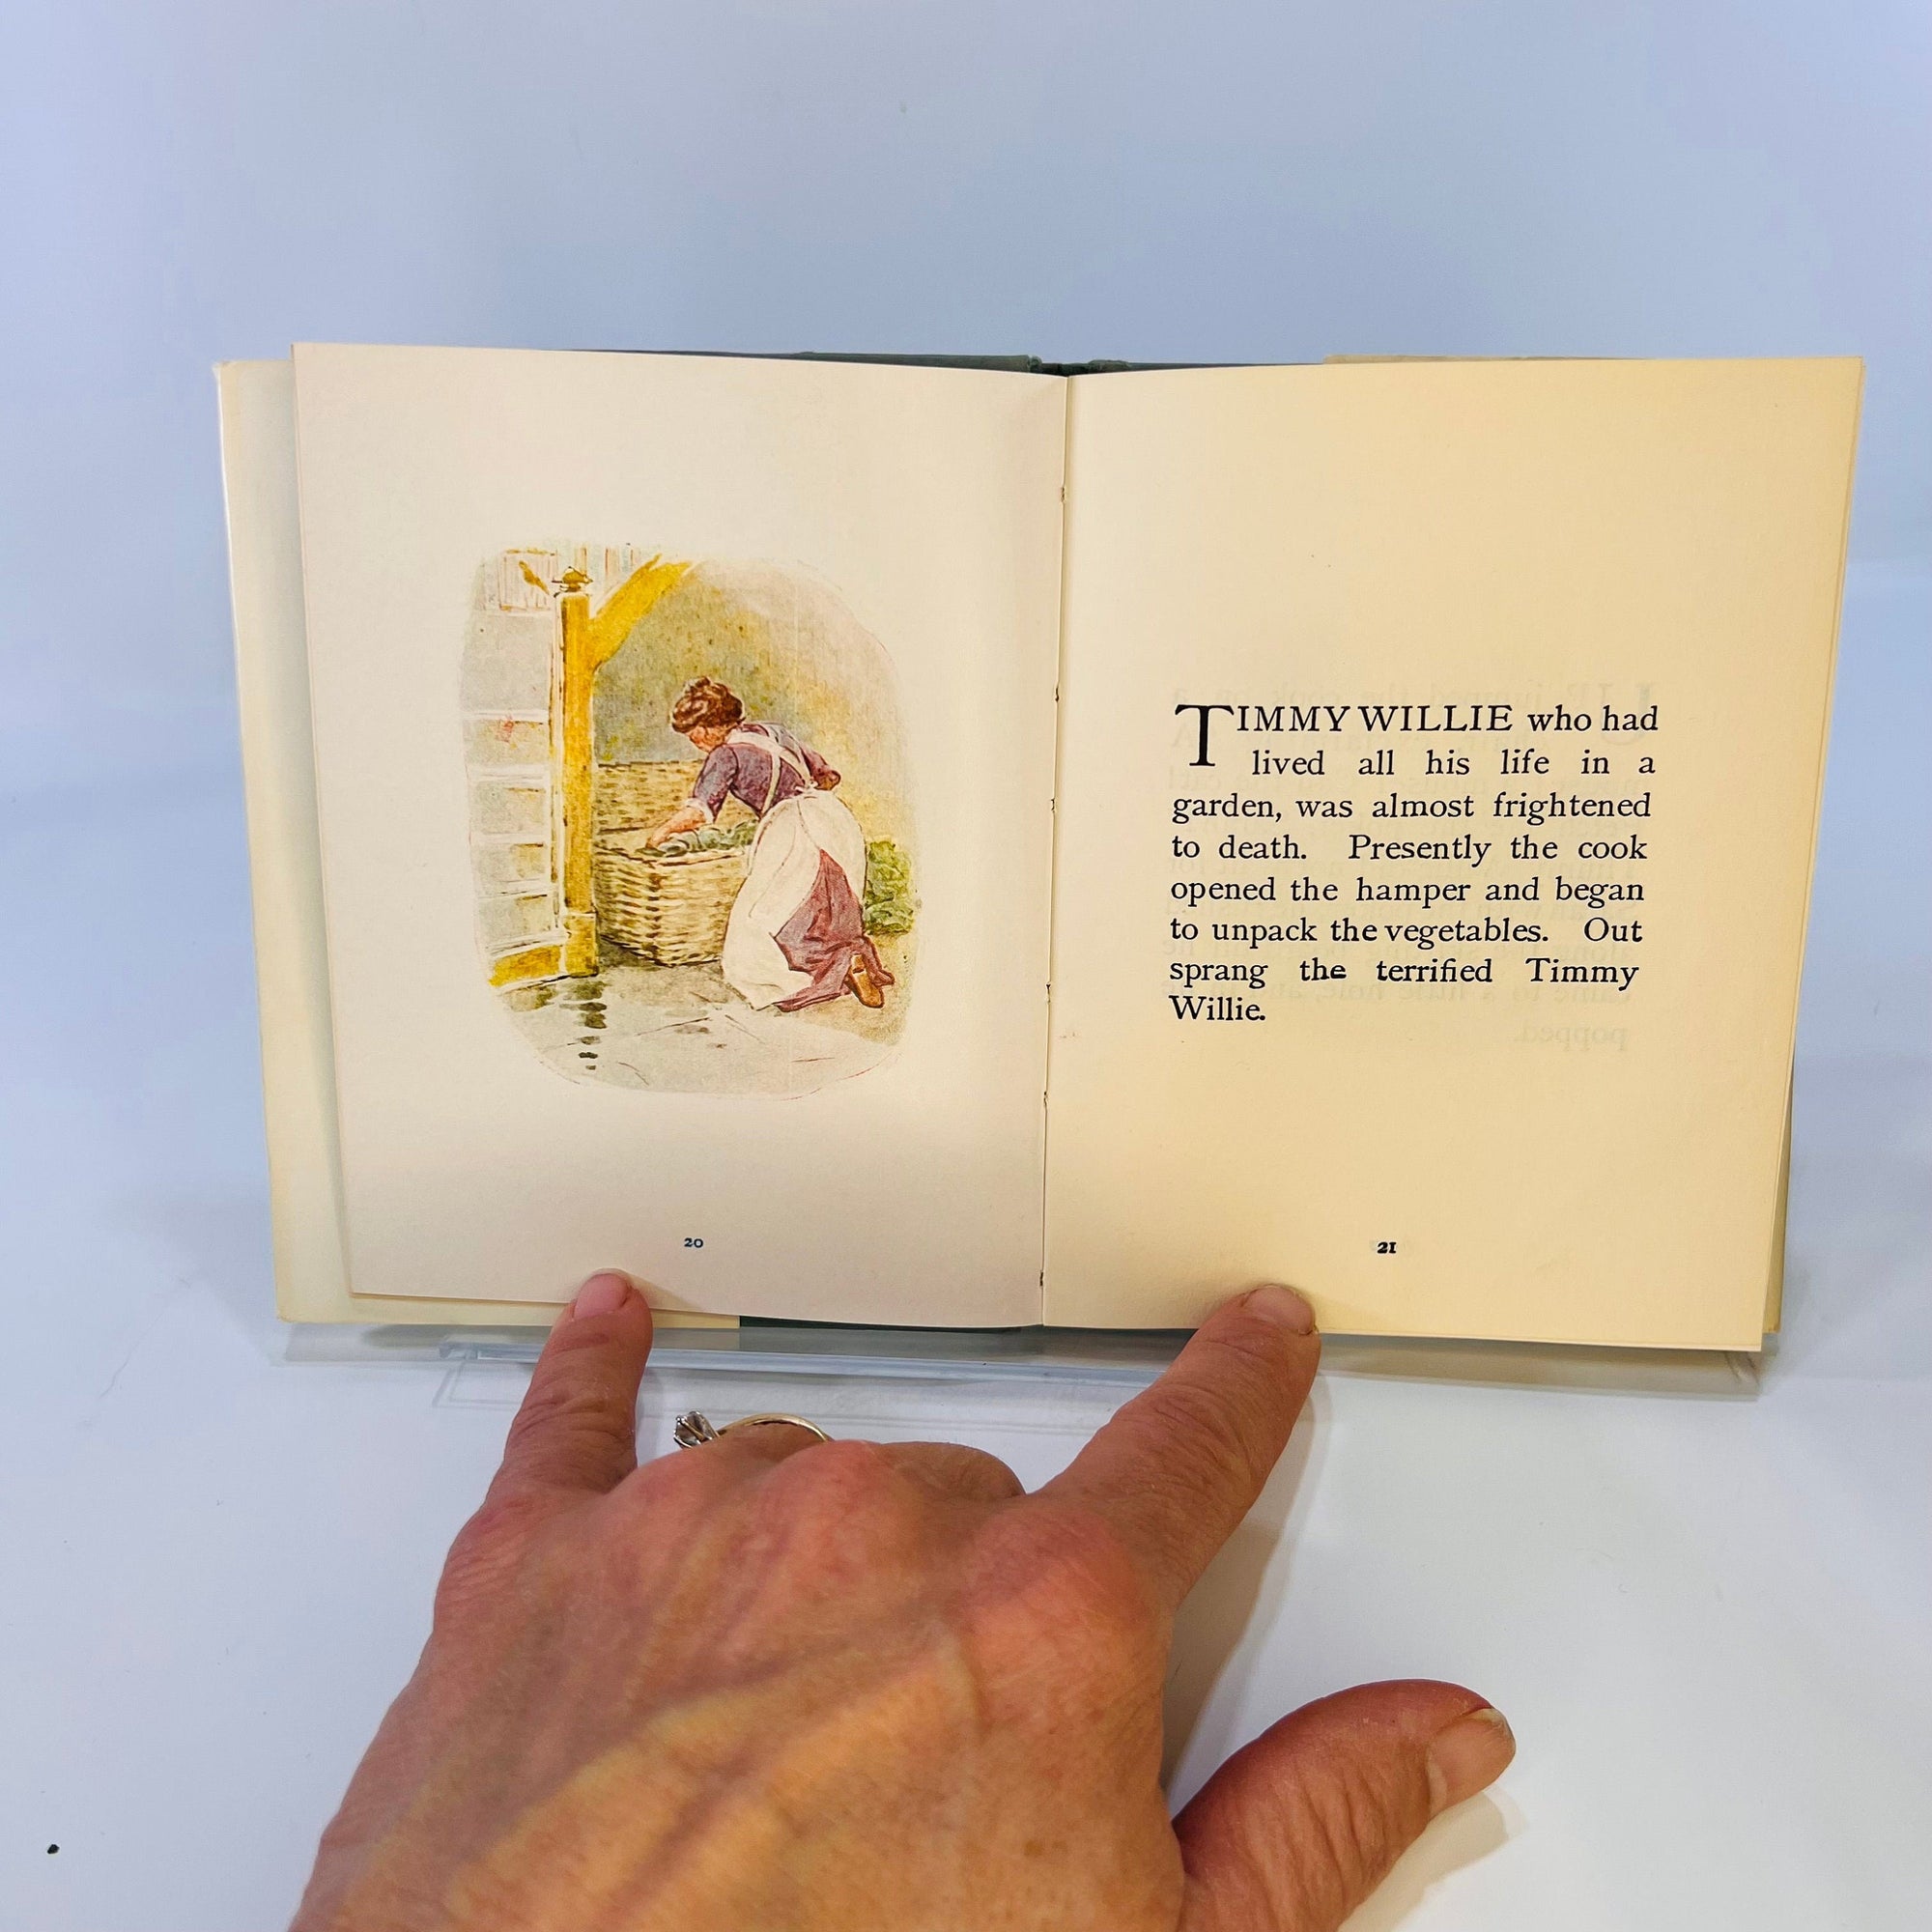 The Tale of Johnny Town Mouse by Beatrix Potter 1946 Frederick Warne & Co. Inc 1946Vintage Book